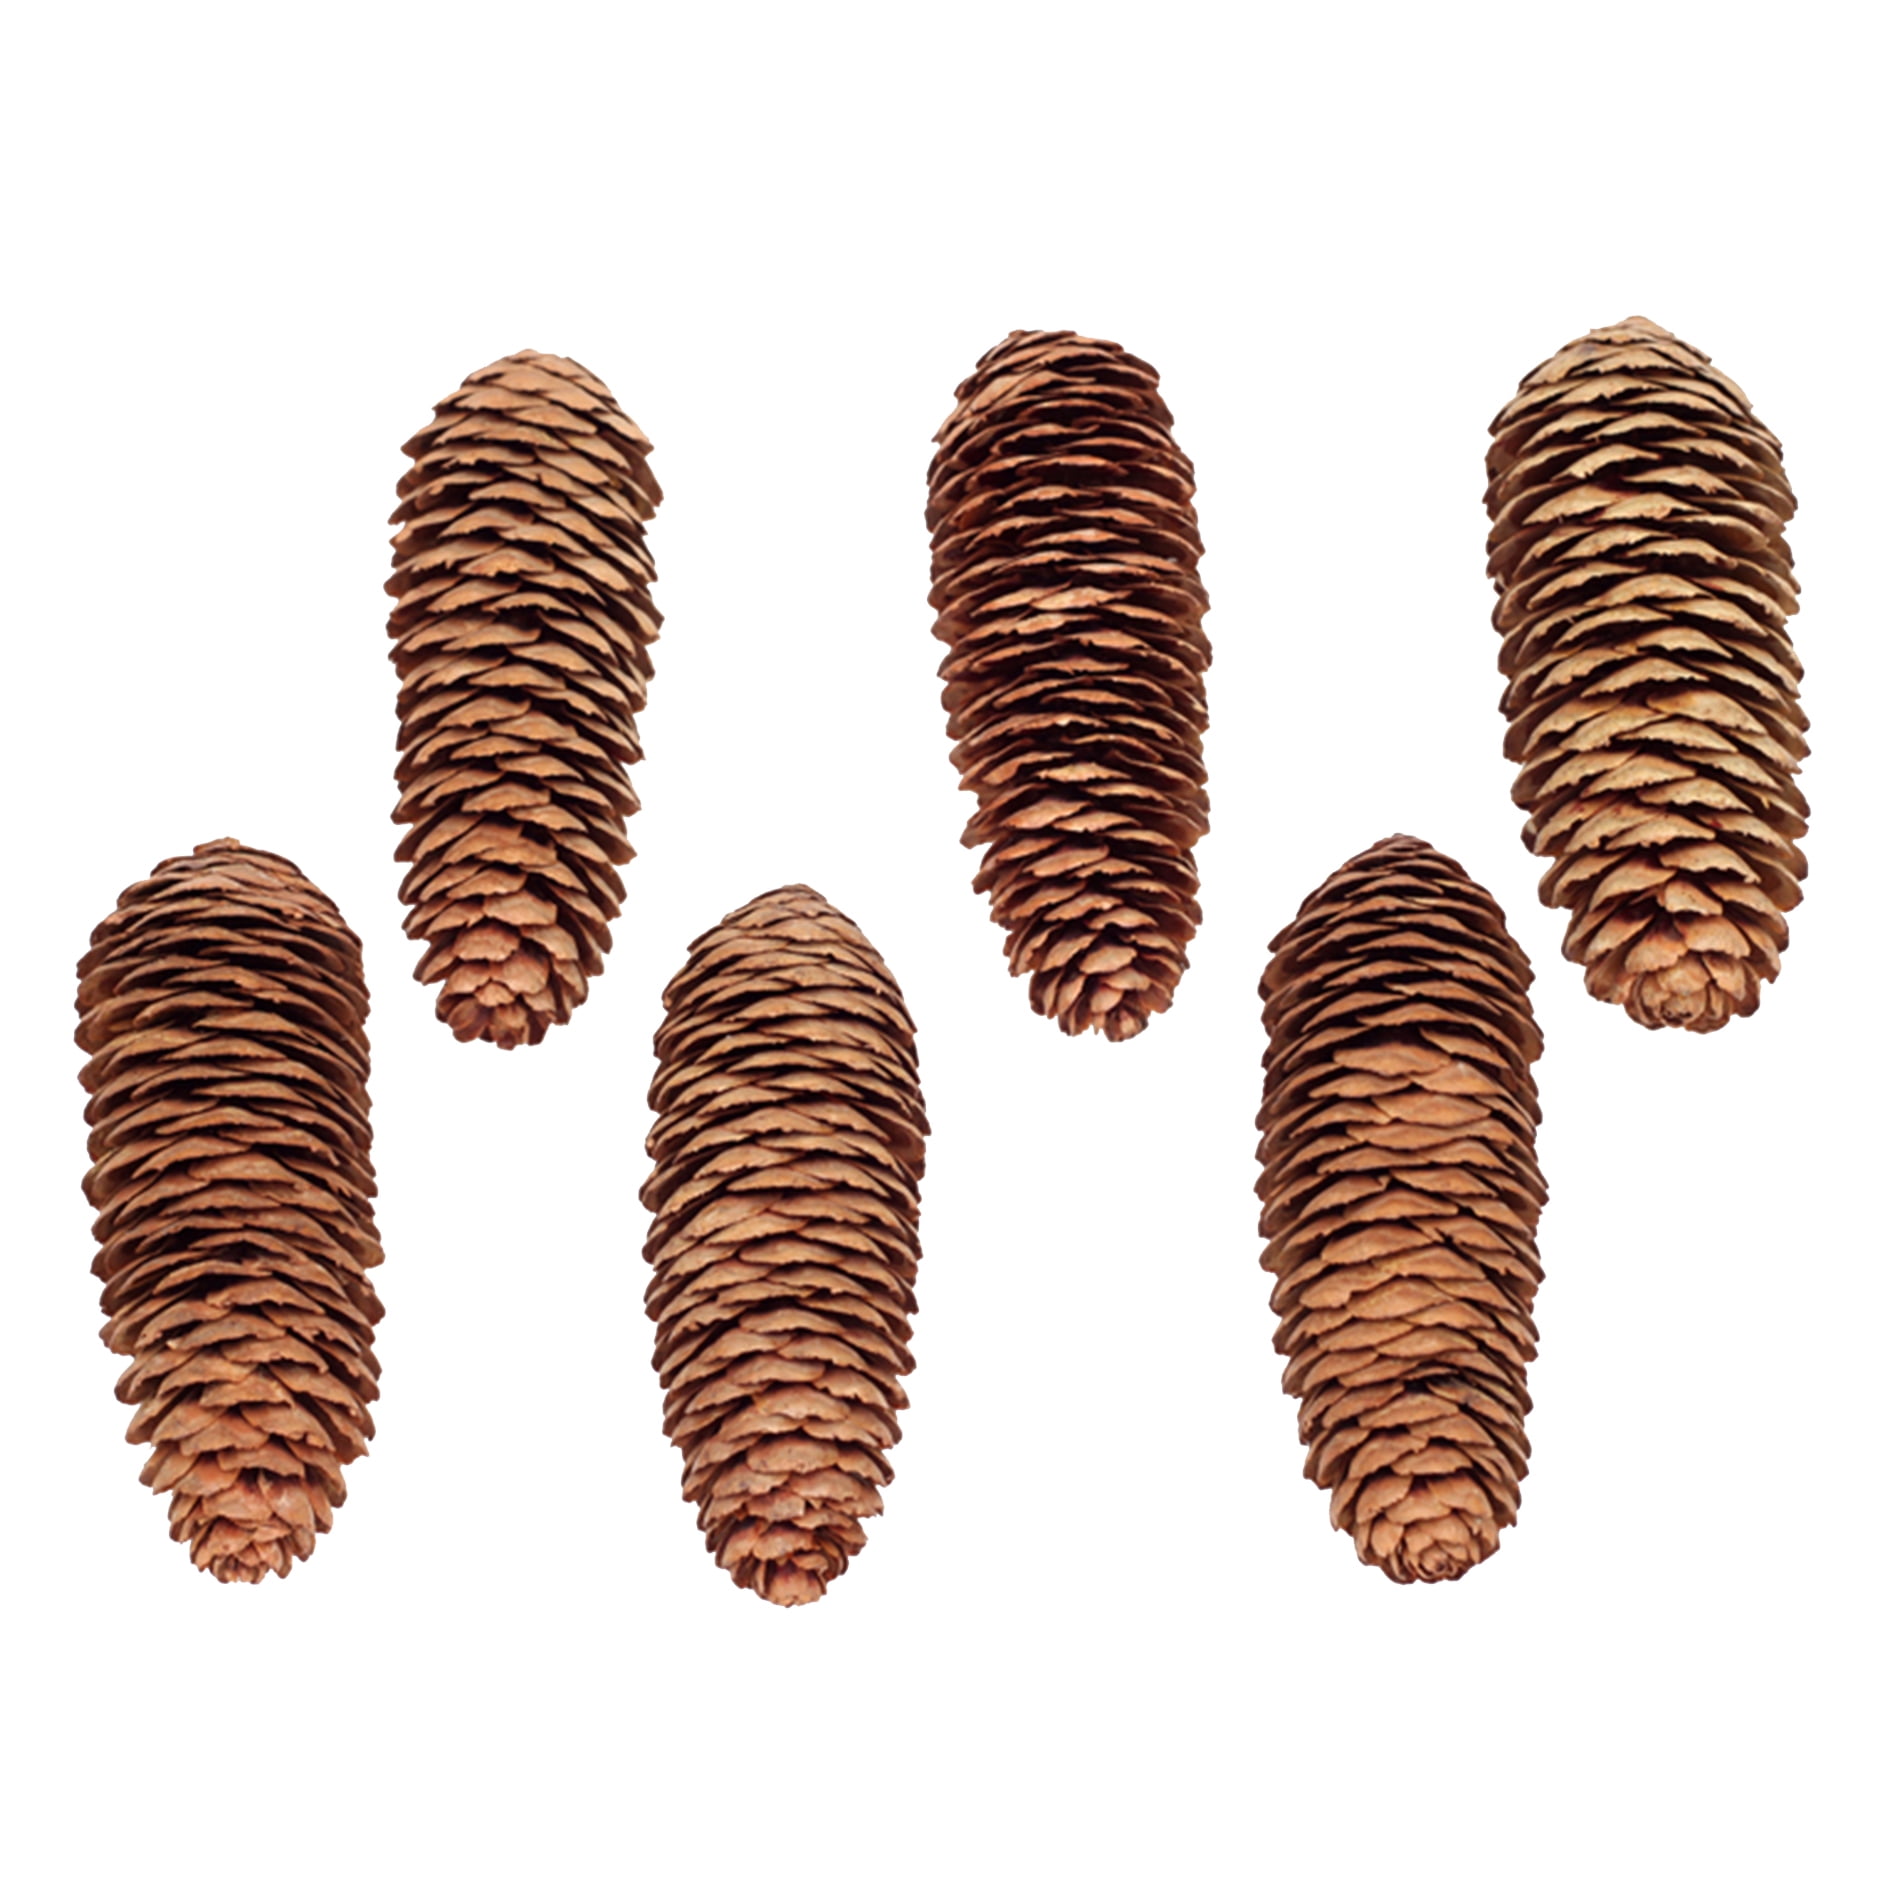 CRAFTS & DECORATION 4" PLUS IN LENGTH EIGHT NATURAL LARGE LONG PINE CONES 